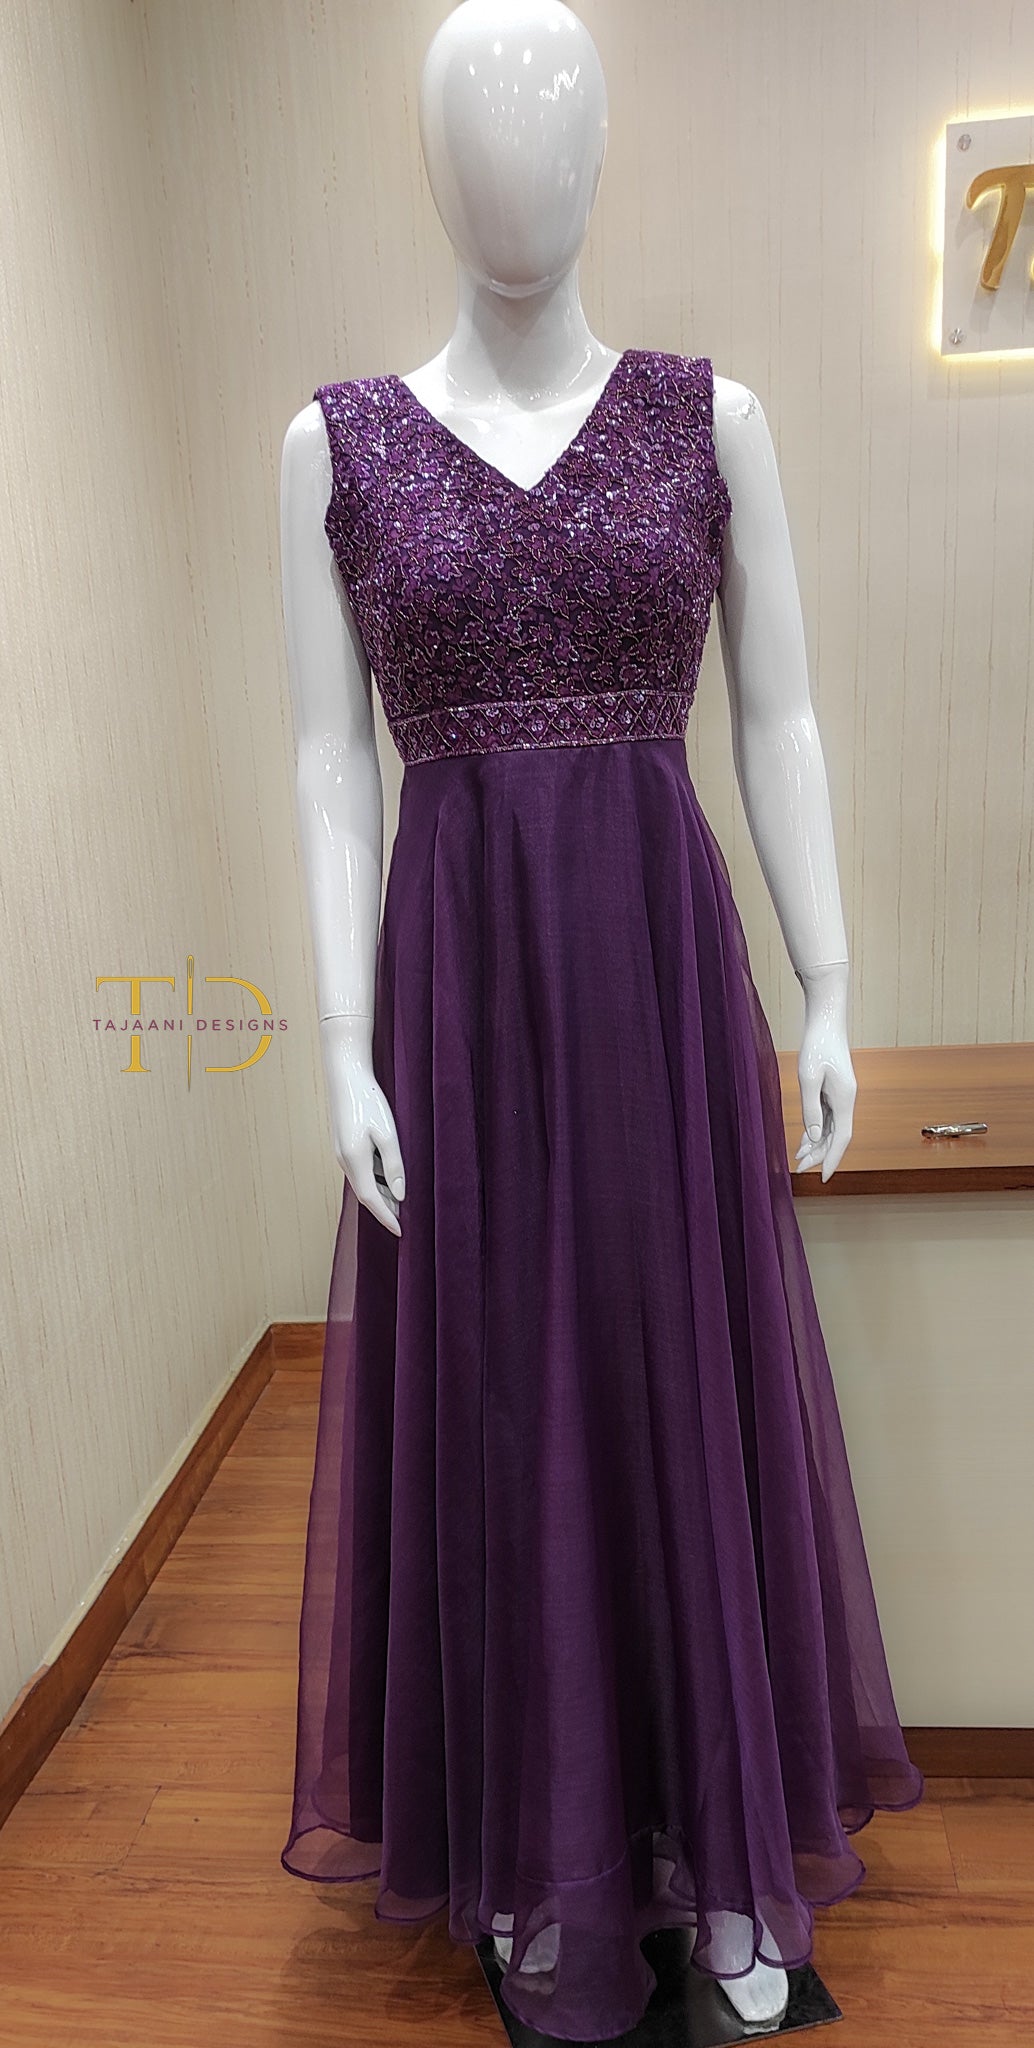 Pin by ravitha balki on Designer frocks | Stylish gown, Party wear gowns, Gown  dress party wear